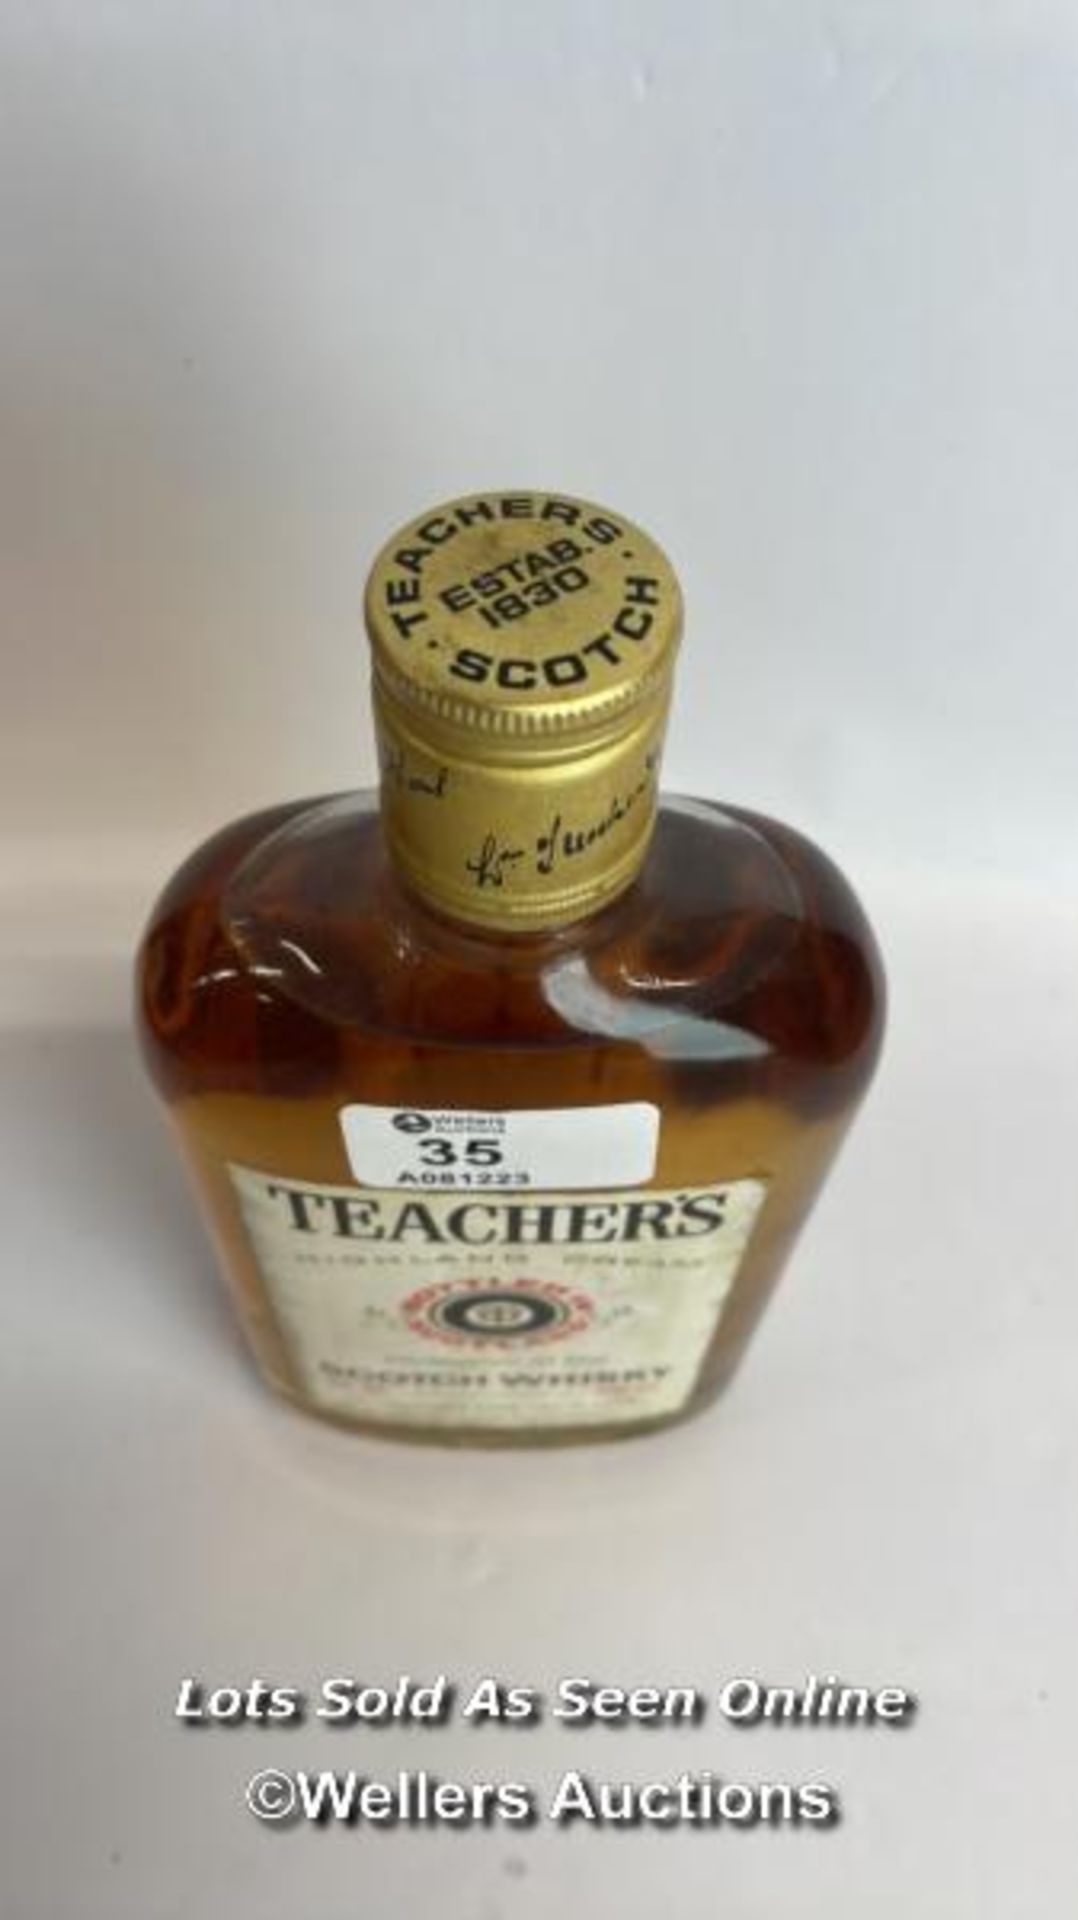 Teachers Highland Cream Scotch Whisky, Vintage bottling, 50cl, 43% vol / Please see images for - Image 4 of 4